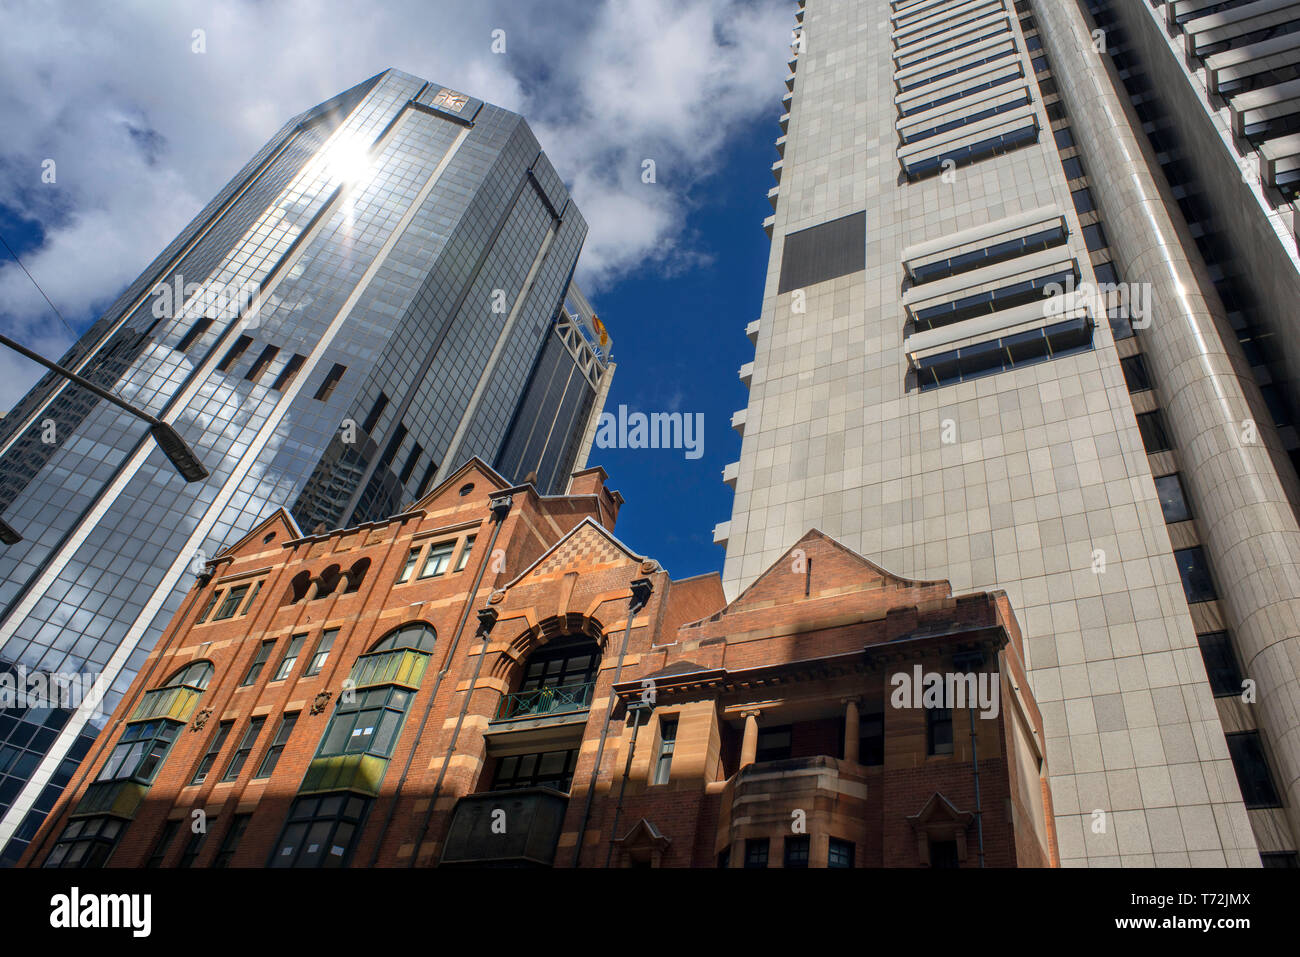 Contrast of old and new buildings in Sydney city center, Sydney, New South Wales, Australia. Johnson’s Building built in 1912 and NAB Business Banking Stock Photo